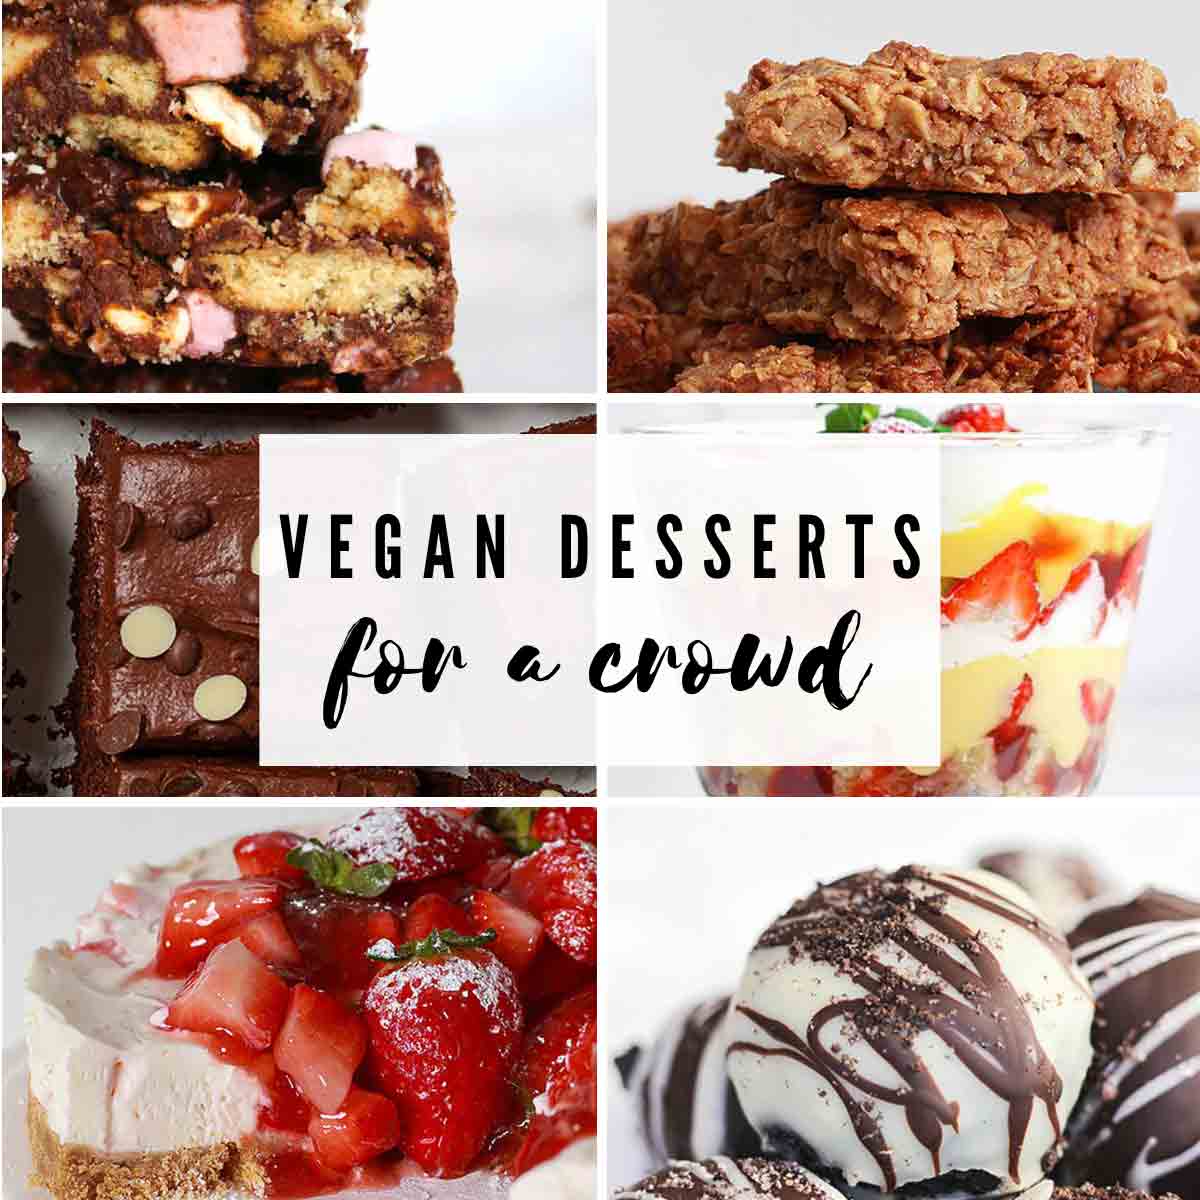 Images Of Desserts With Text Overlay That Reads 'vegan Desserts For A Crowd'